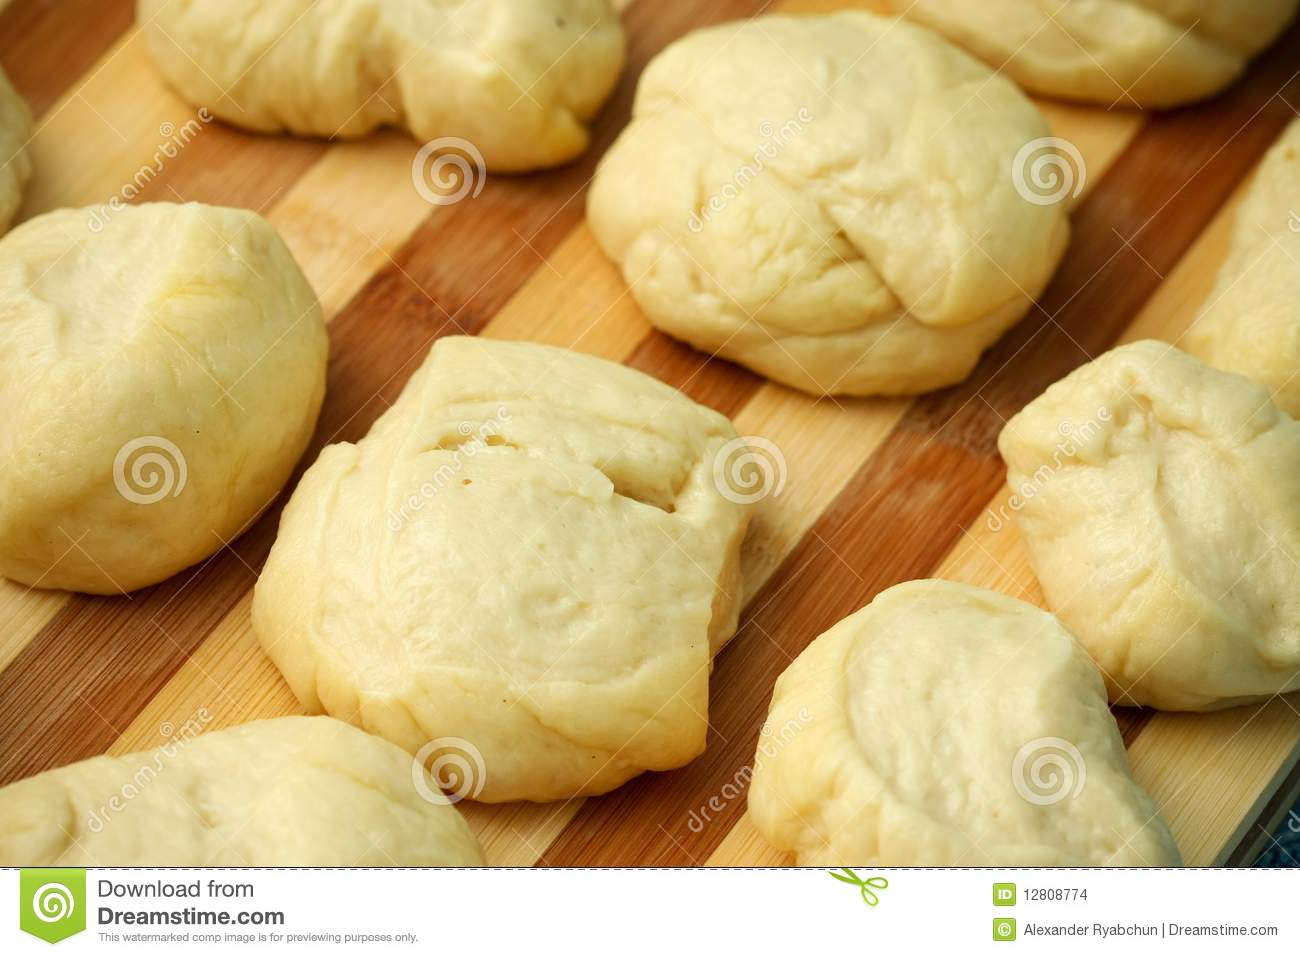 Raw Pie Dough On A Board Stock Images   Image  12808774